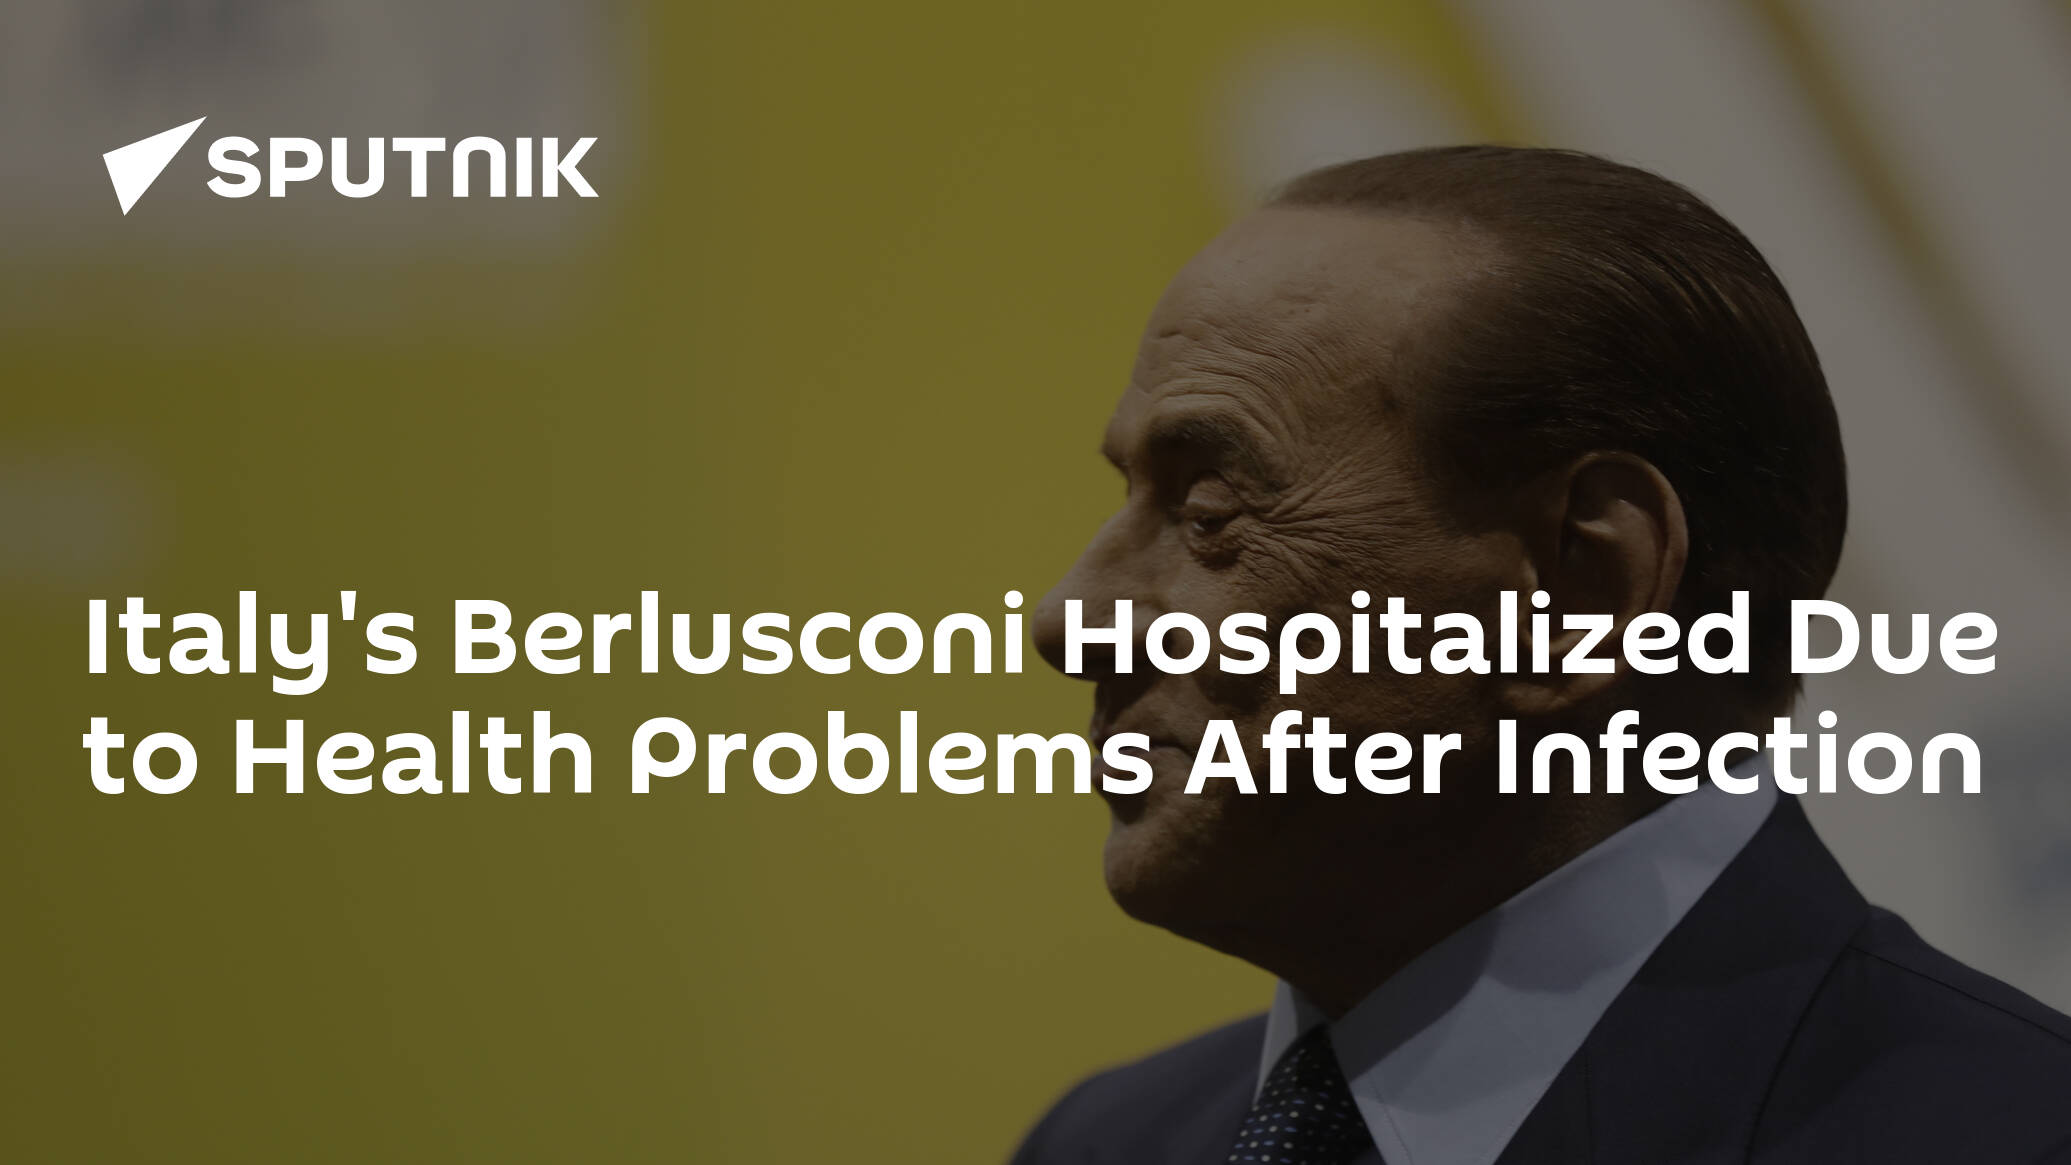 Italy's Berlusconi Hospitalized Due to Health Problems After Infection